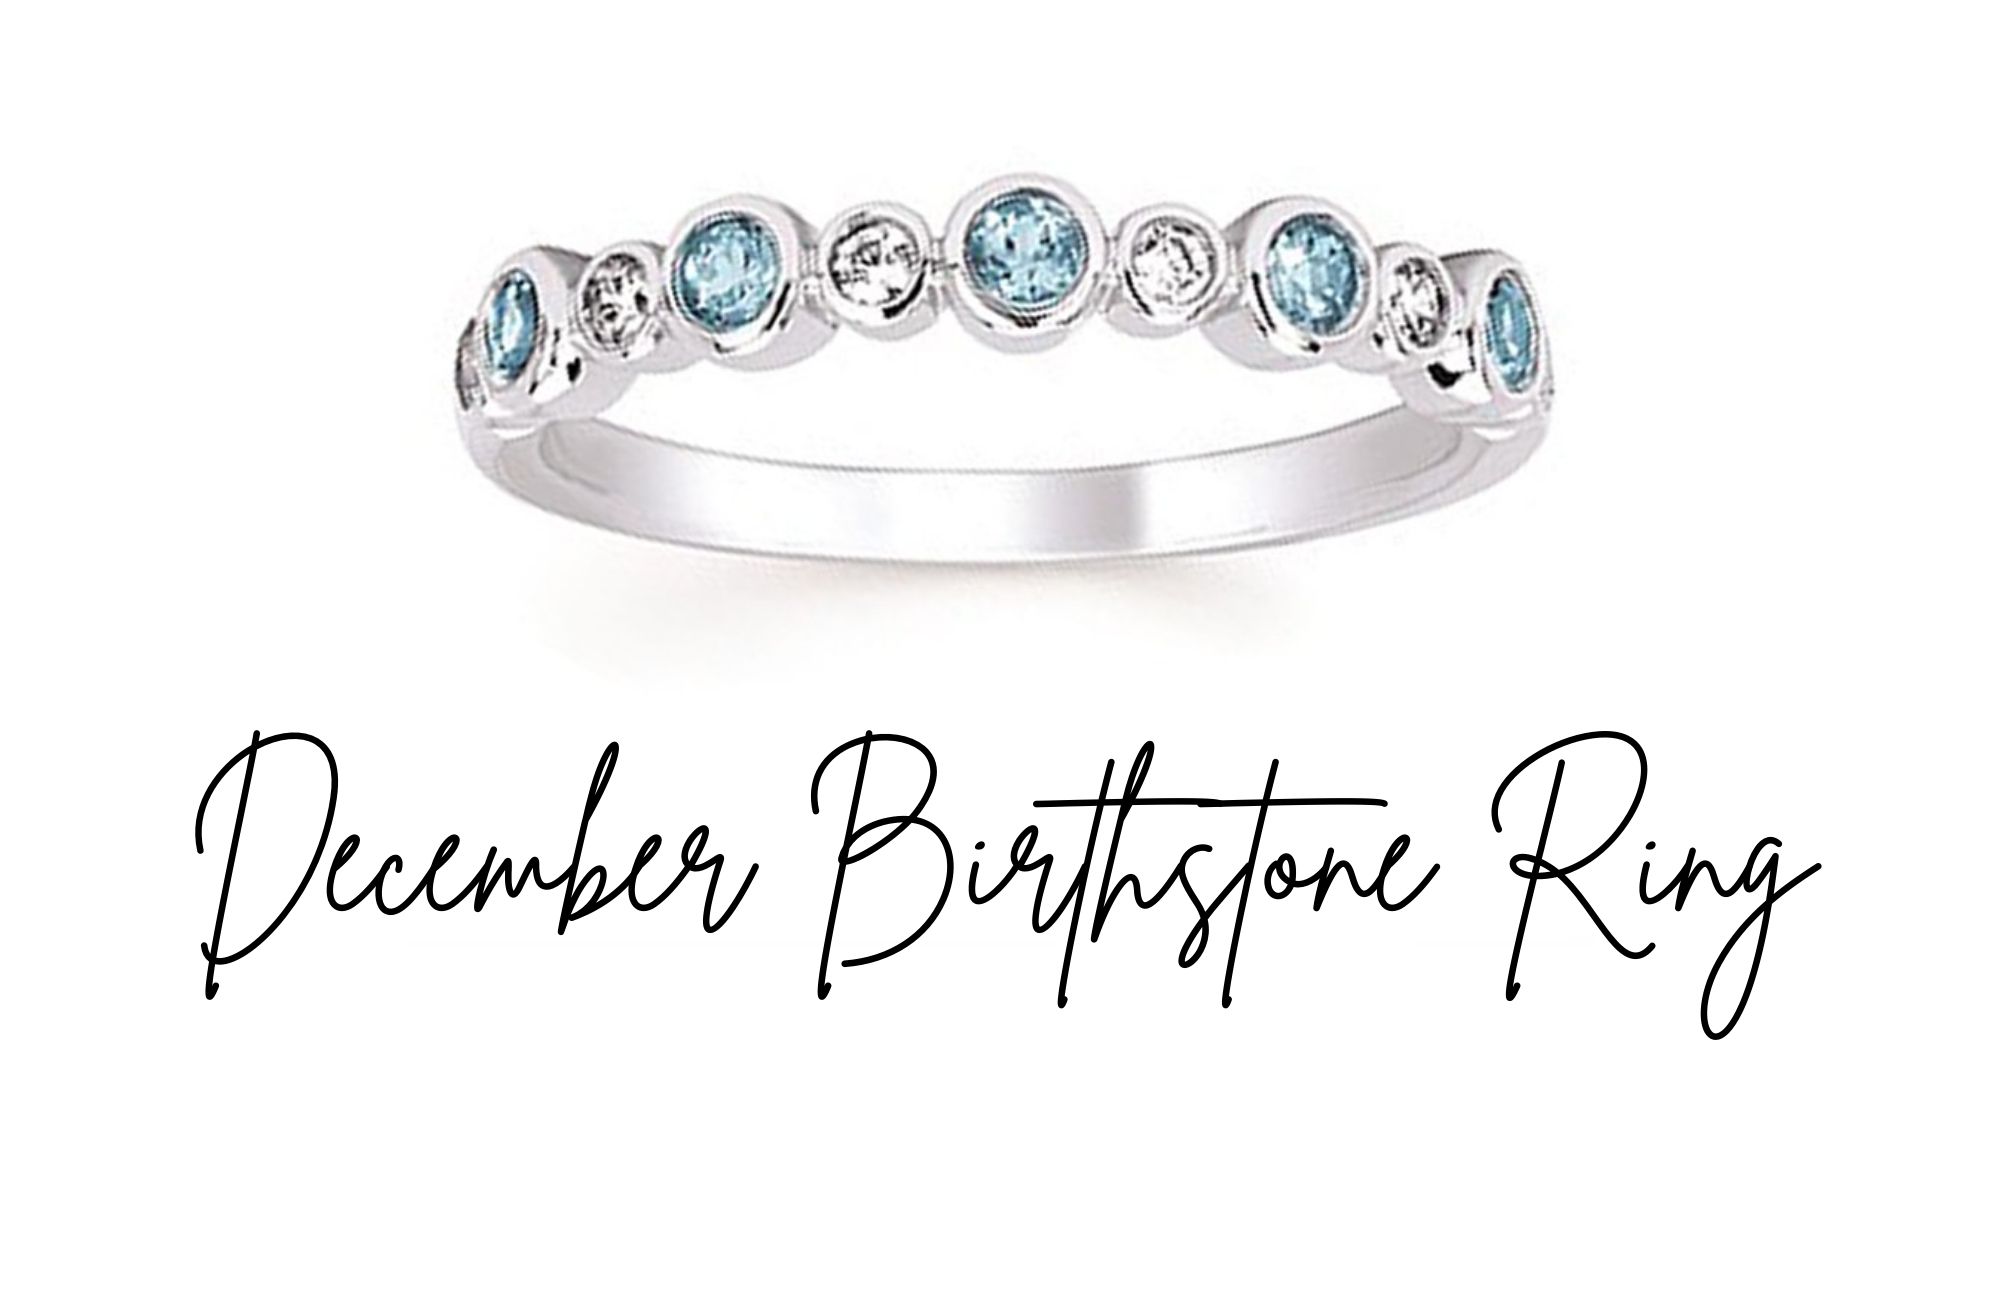 December Birthstone Rings - The Best Rings To Wear During The Cold Season